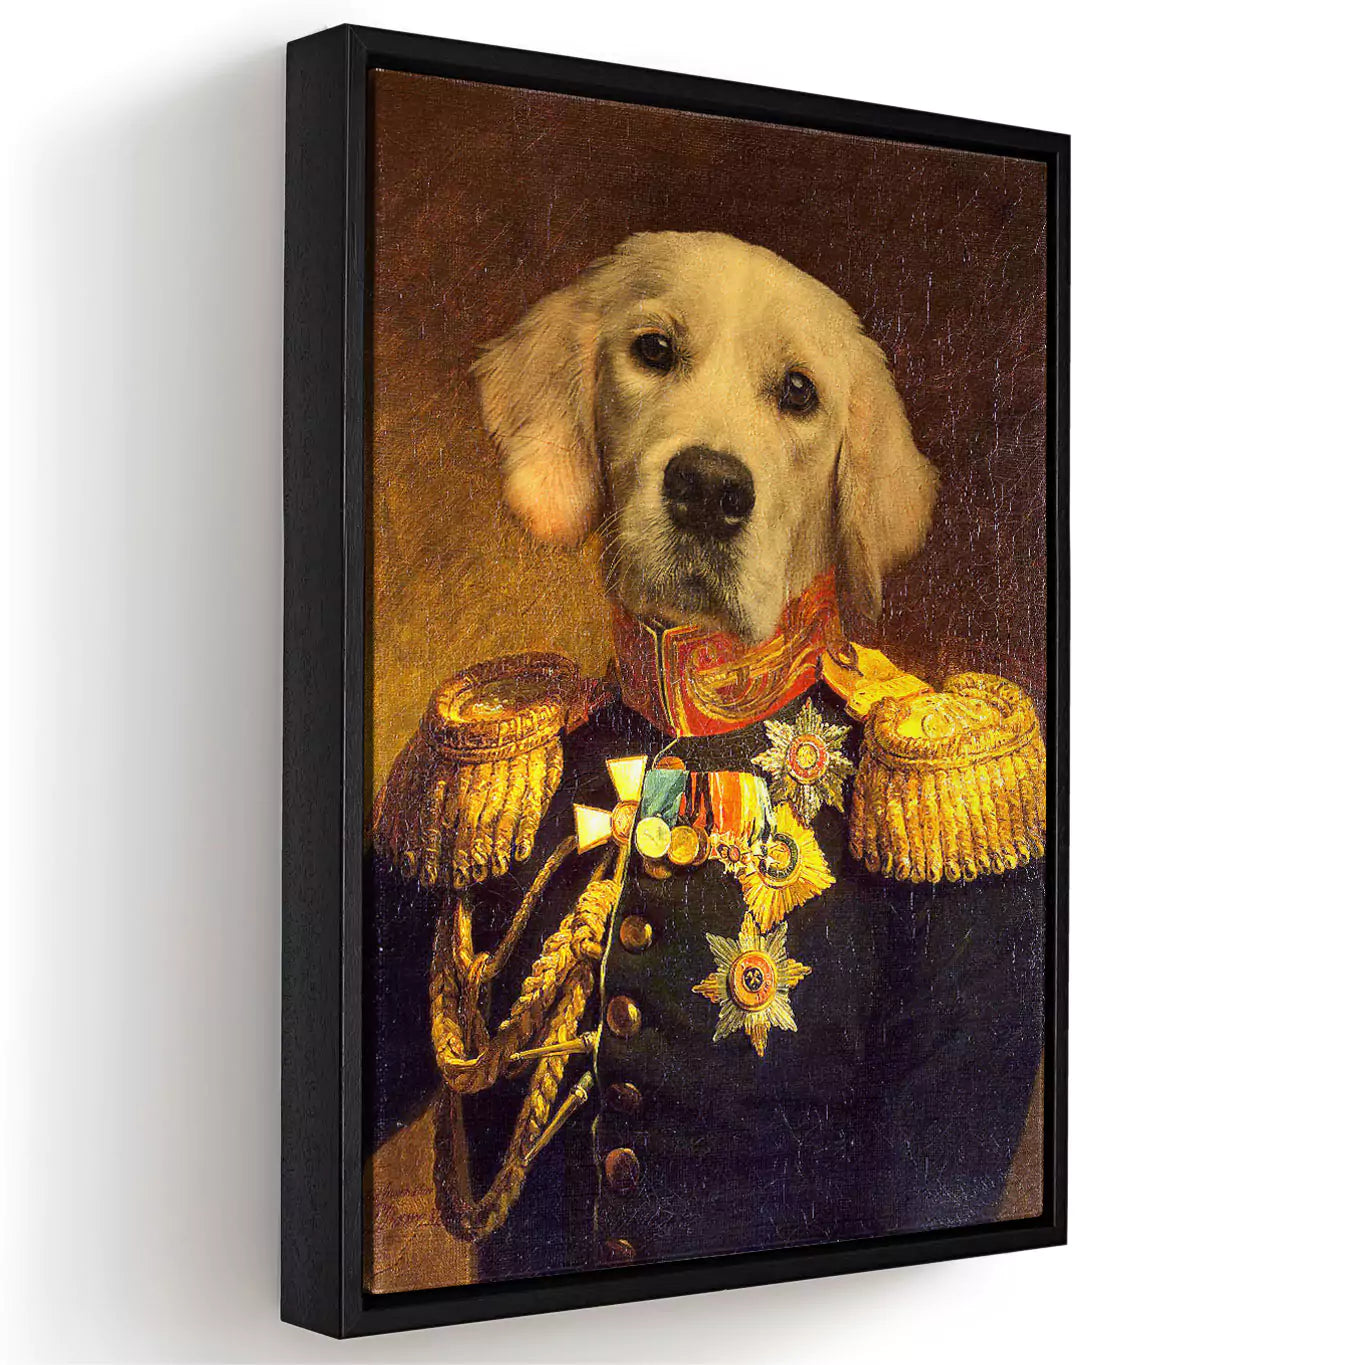 royal dog painting, renaissance dog painting, admiral dog print, admiral pet print, admiral dog canvas, vintage dog art, dog wearing vintage clothes, dog in admiral outfit with epaulettes, personalised dog canvas pet art